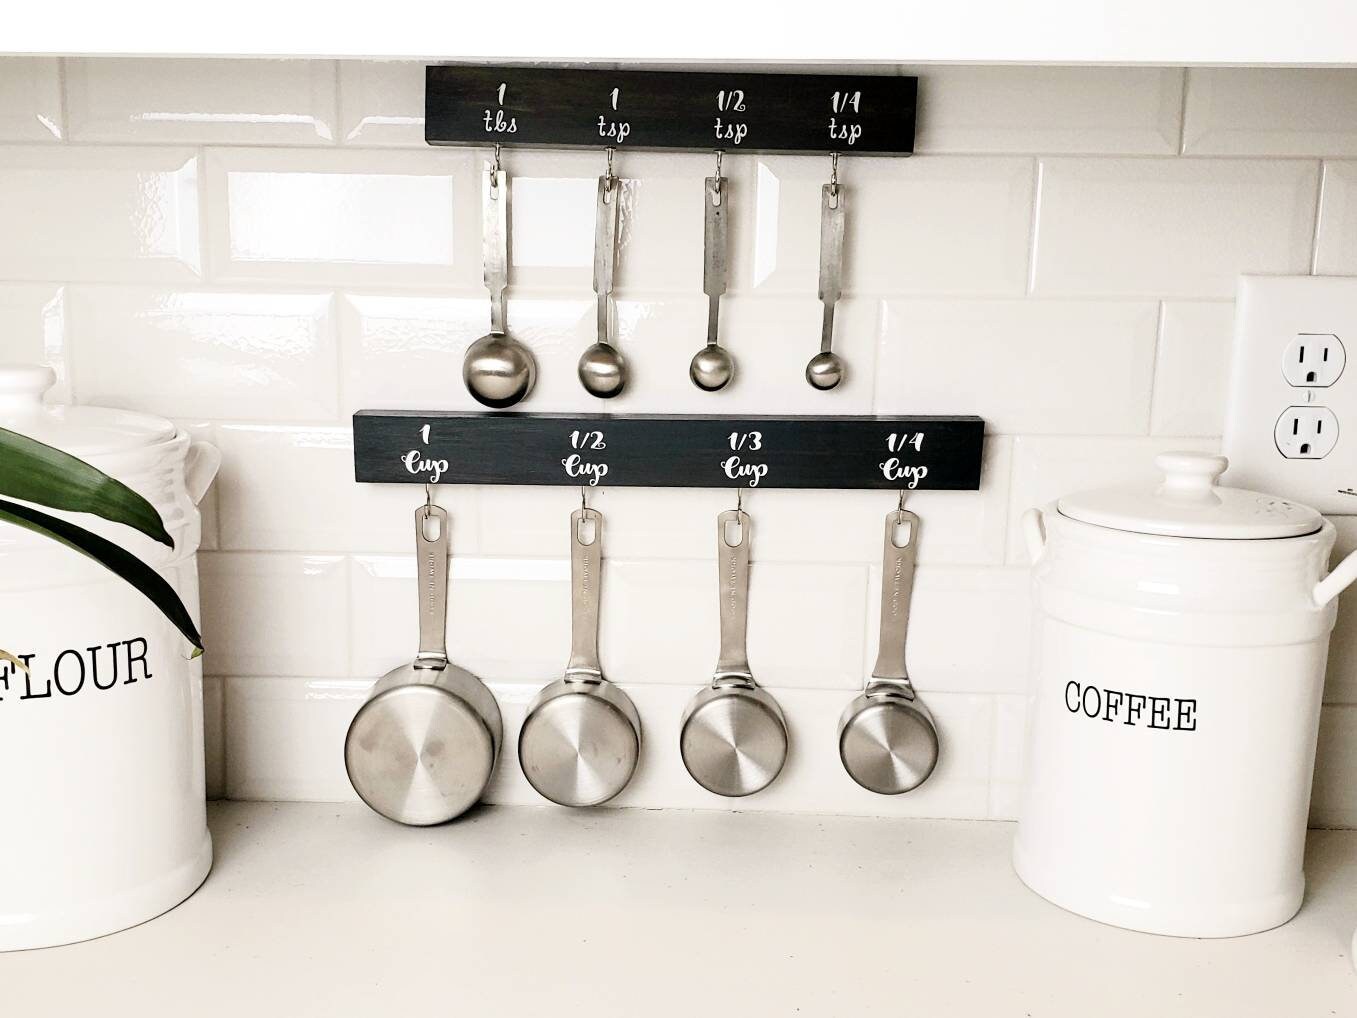 Organizing Measuring Cups and Spoons - Infarrantly Creative